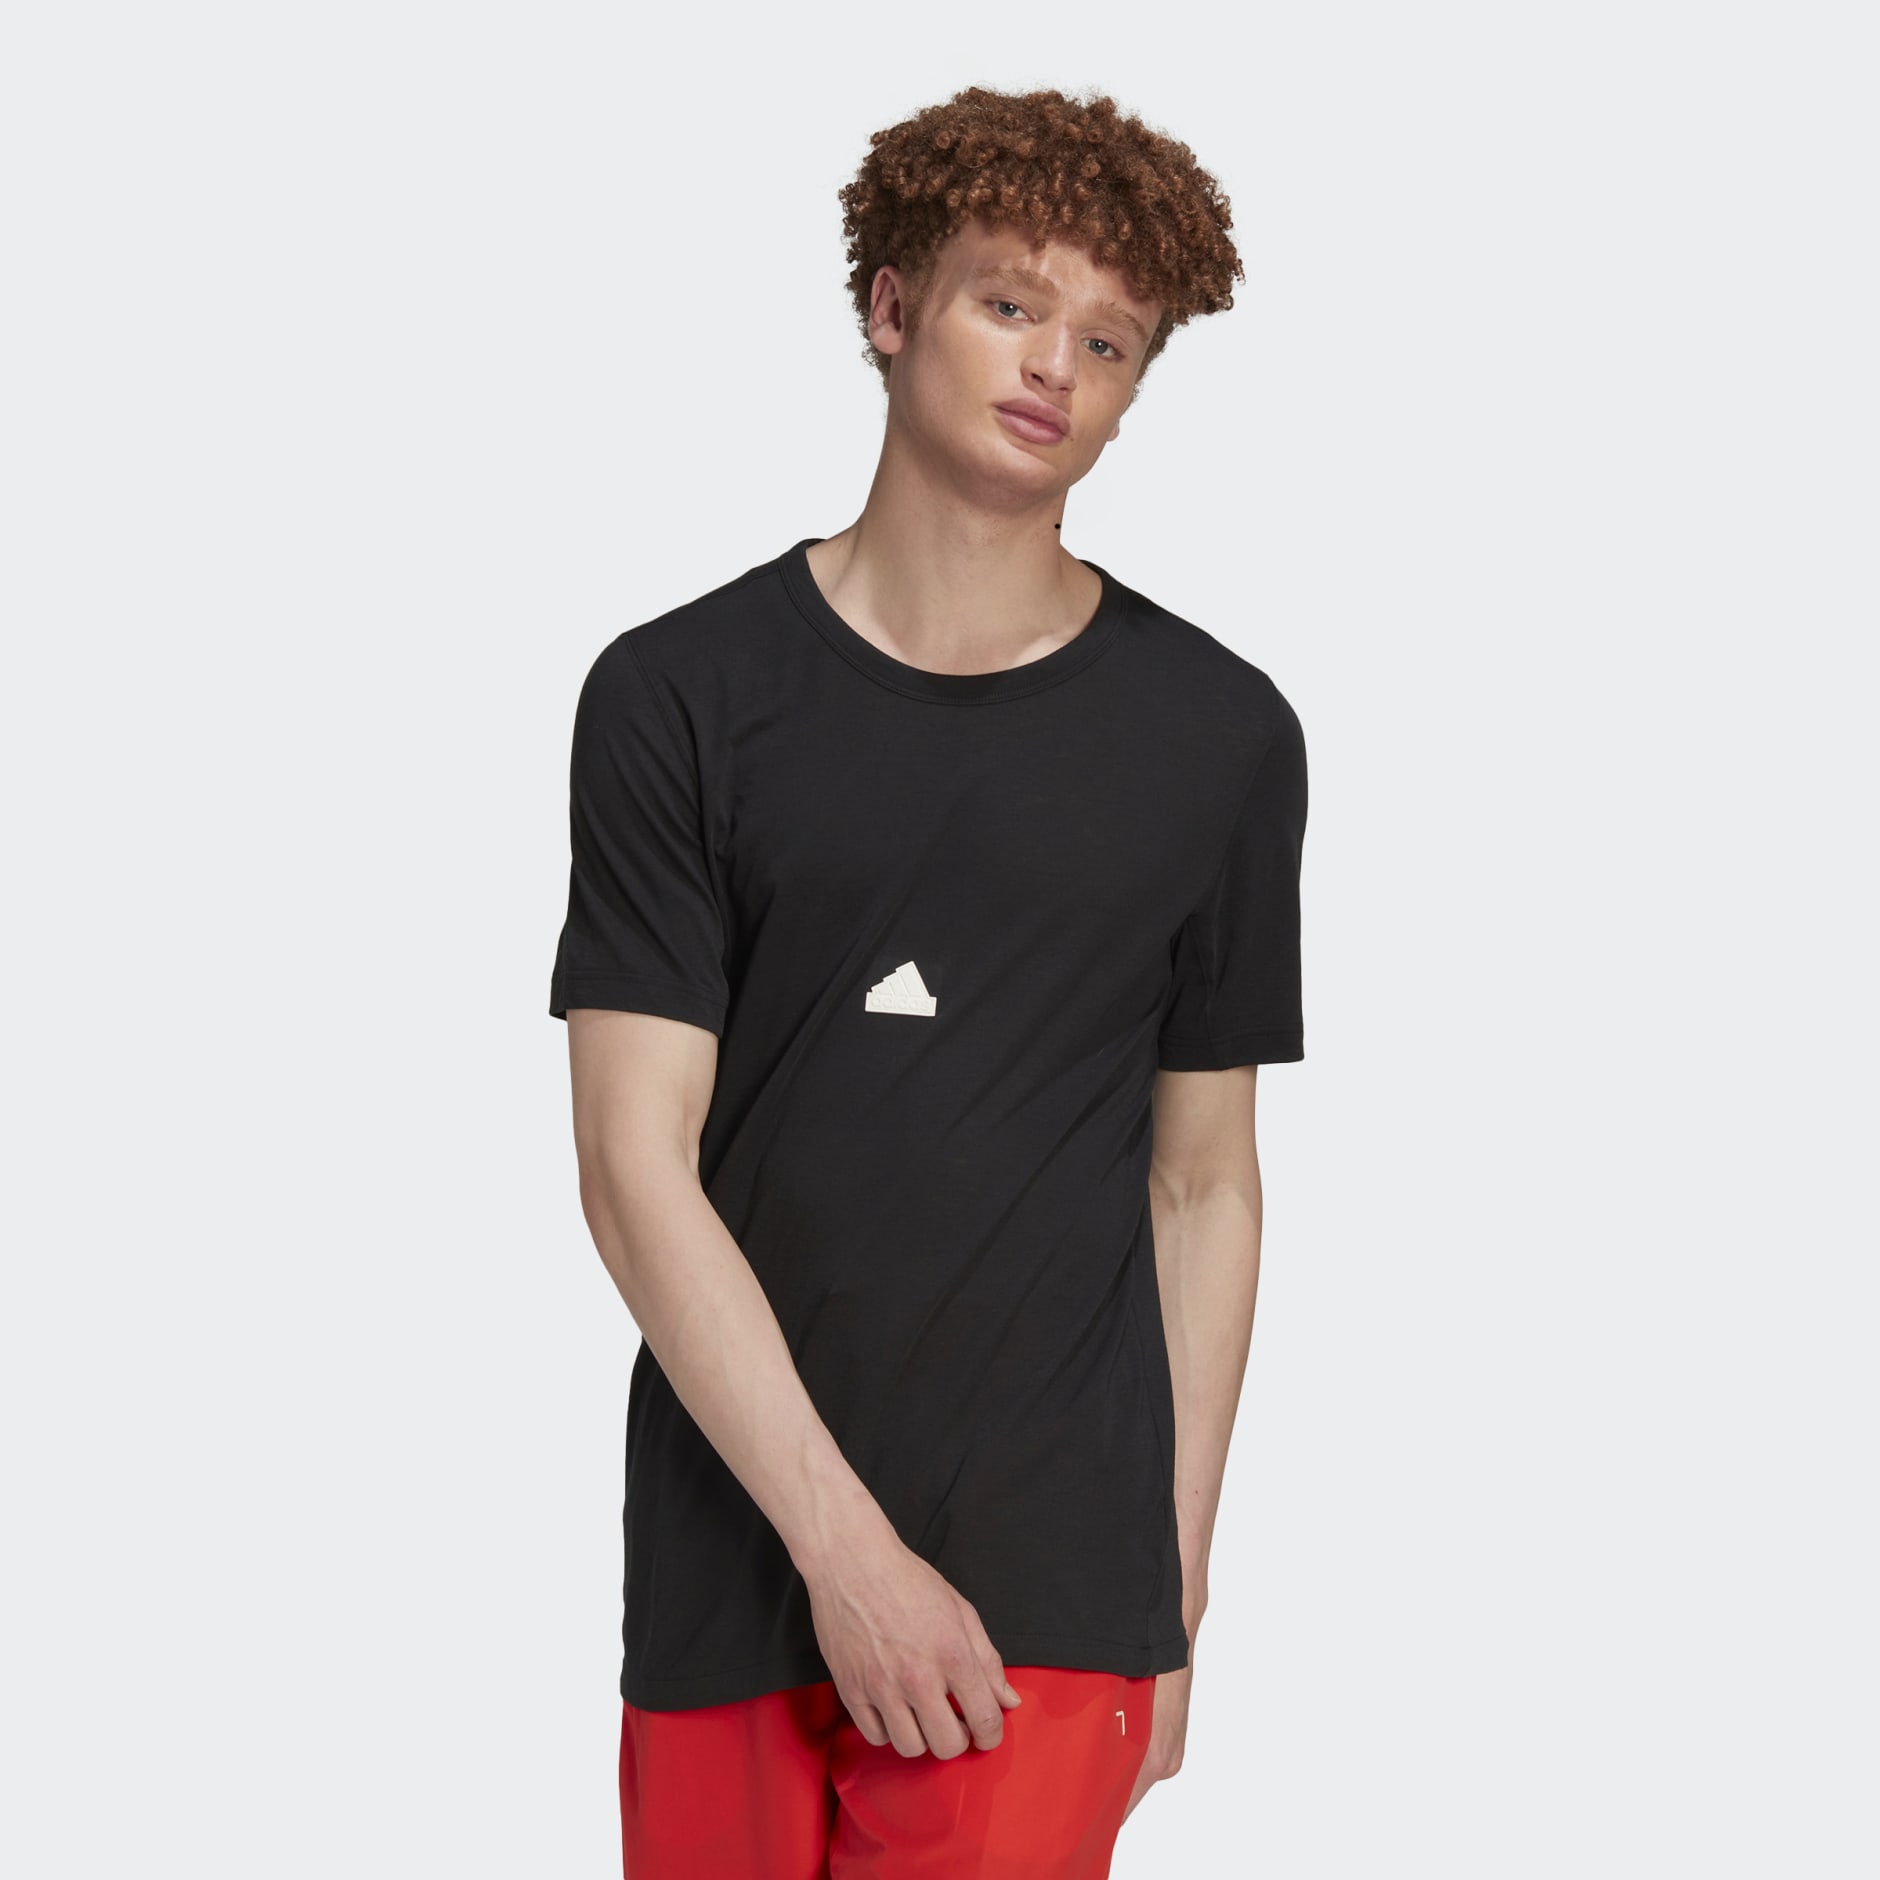 Clothing - Tee - Black | adidas South Africa